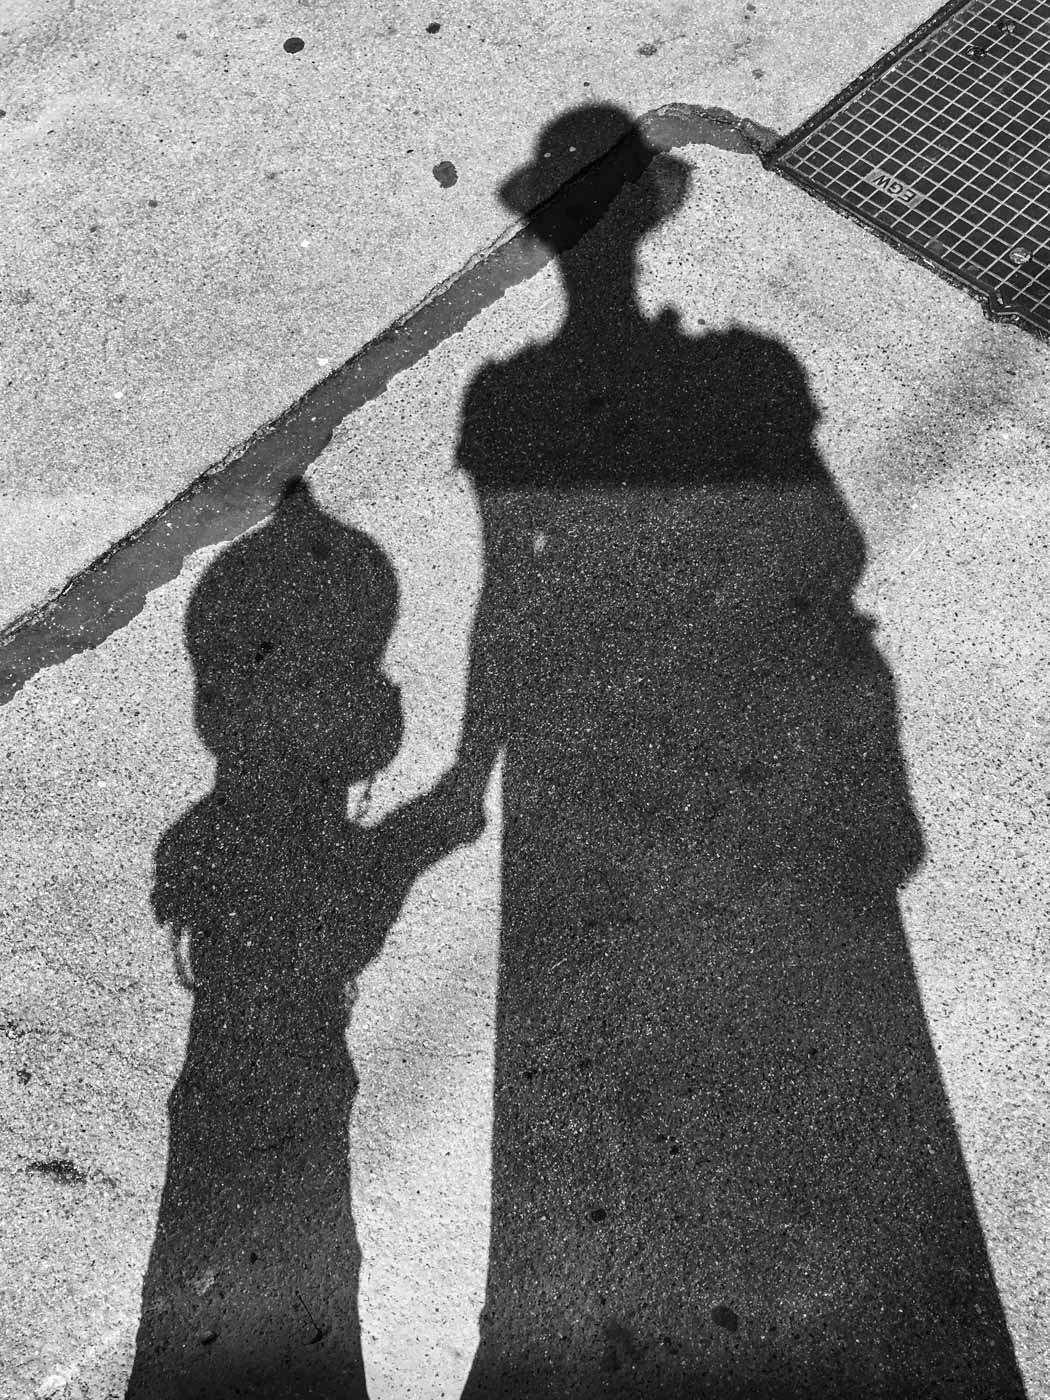 IMG_6553b_by_petra_rautenstrauch_self_portrait_photography_shadow_play_art_project